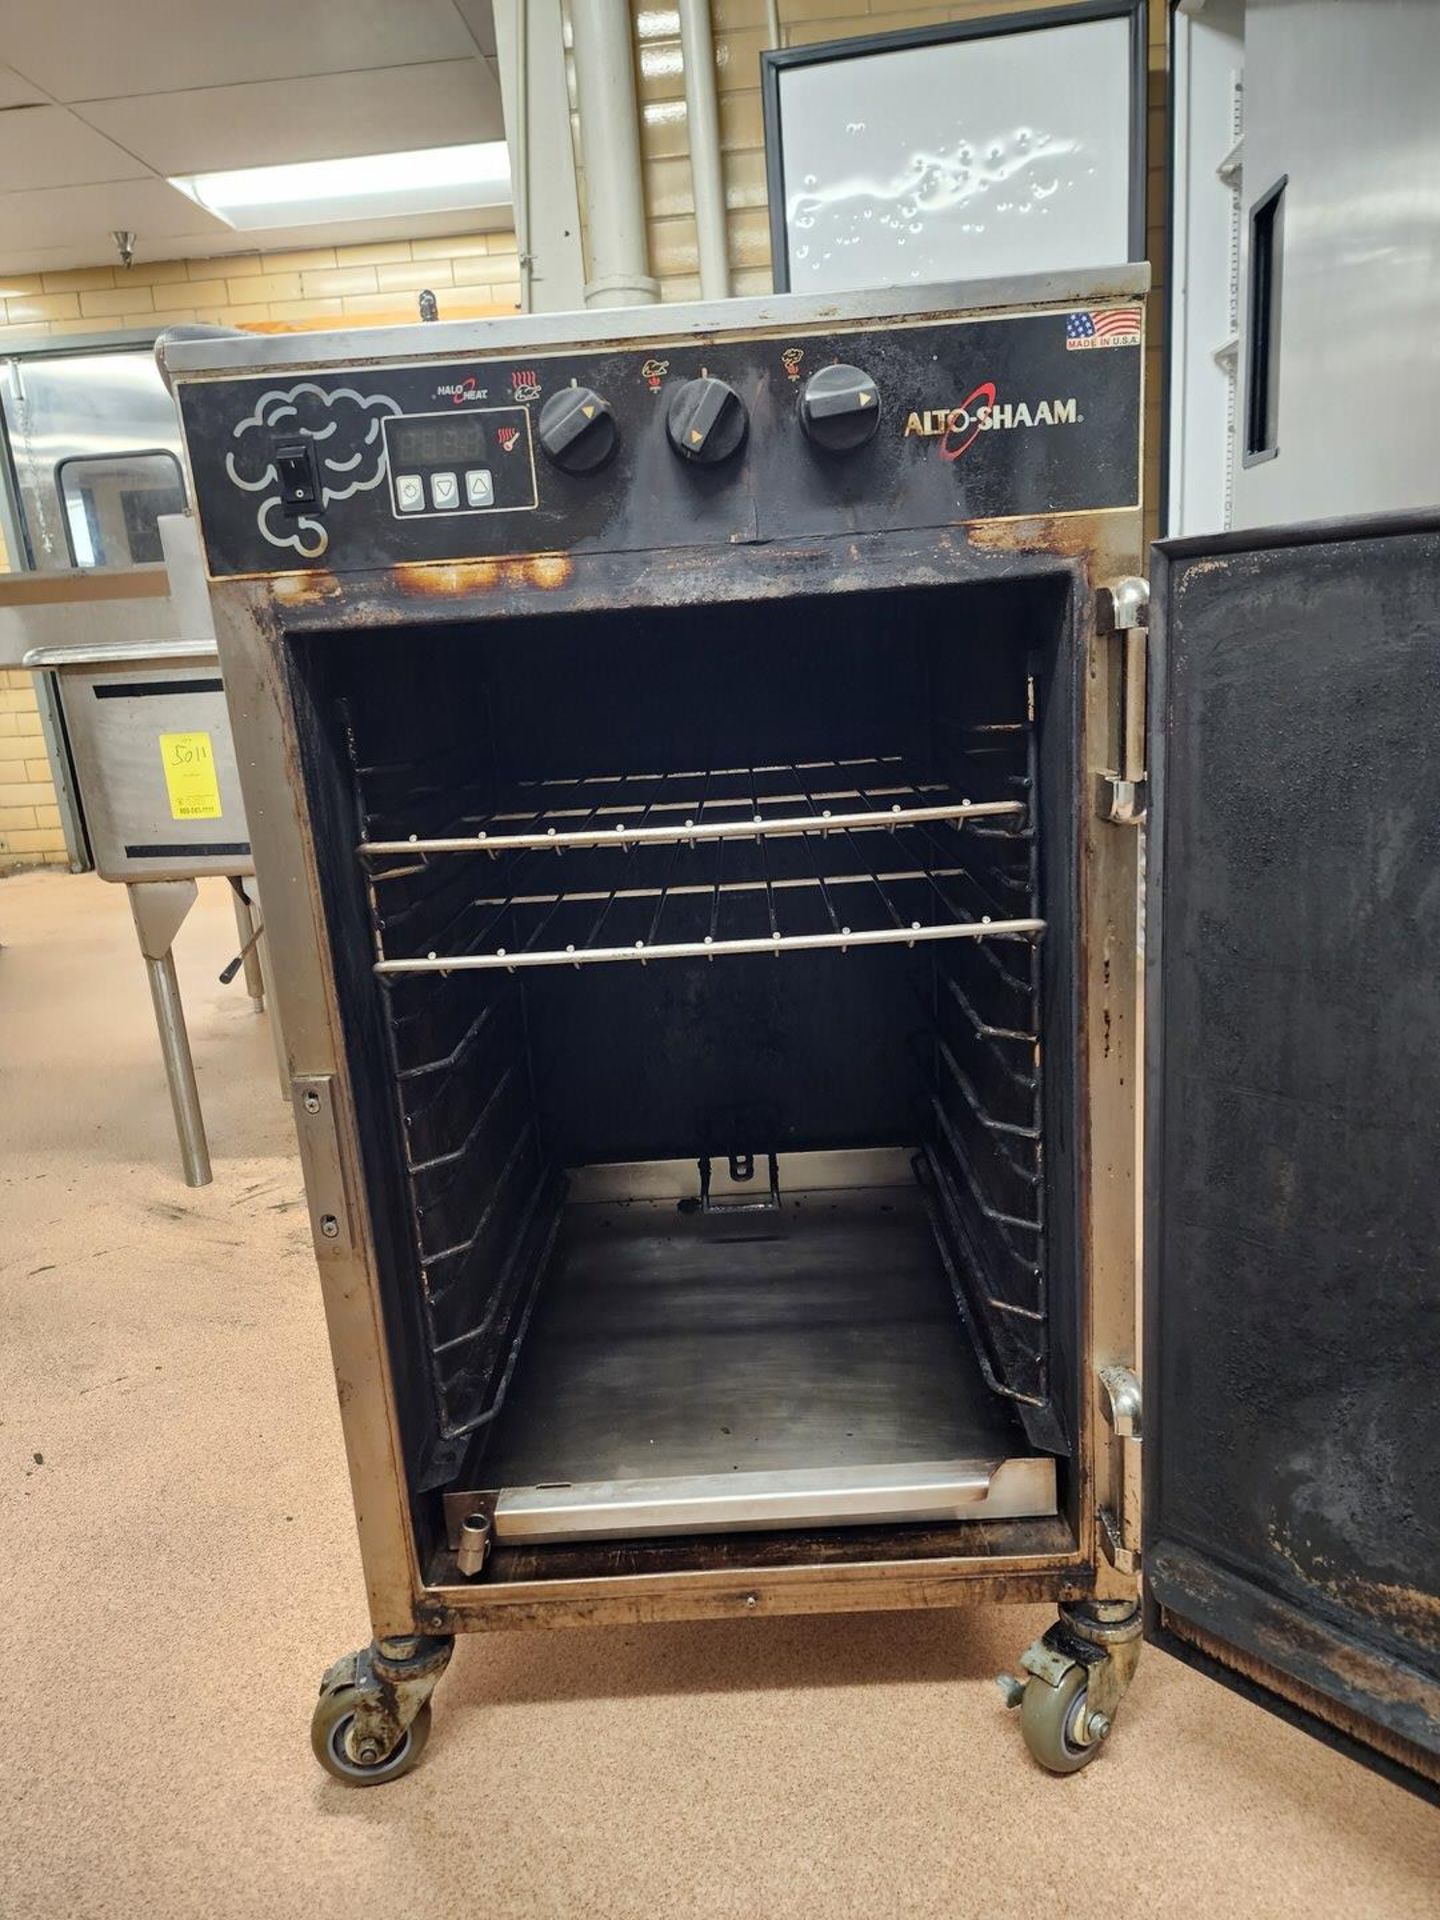 Alto-Shaam 1000-SK/II Cook & Hold Smoker Oven 3260W - Image 4 of 5